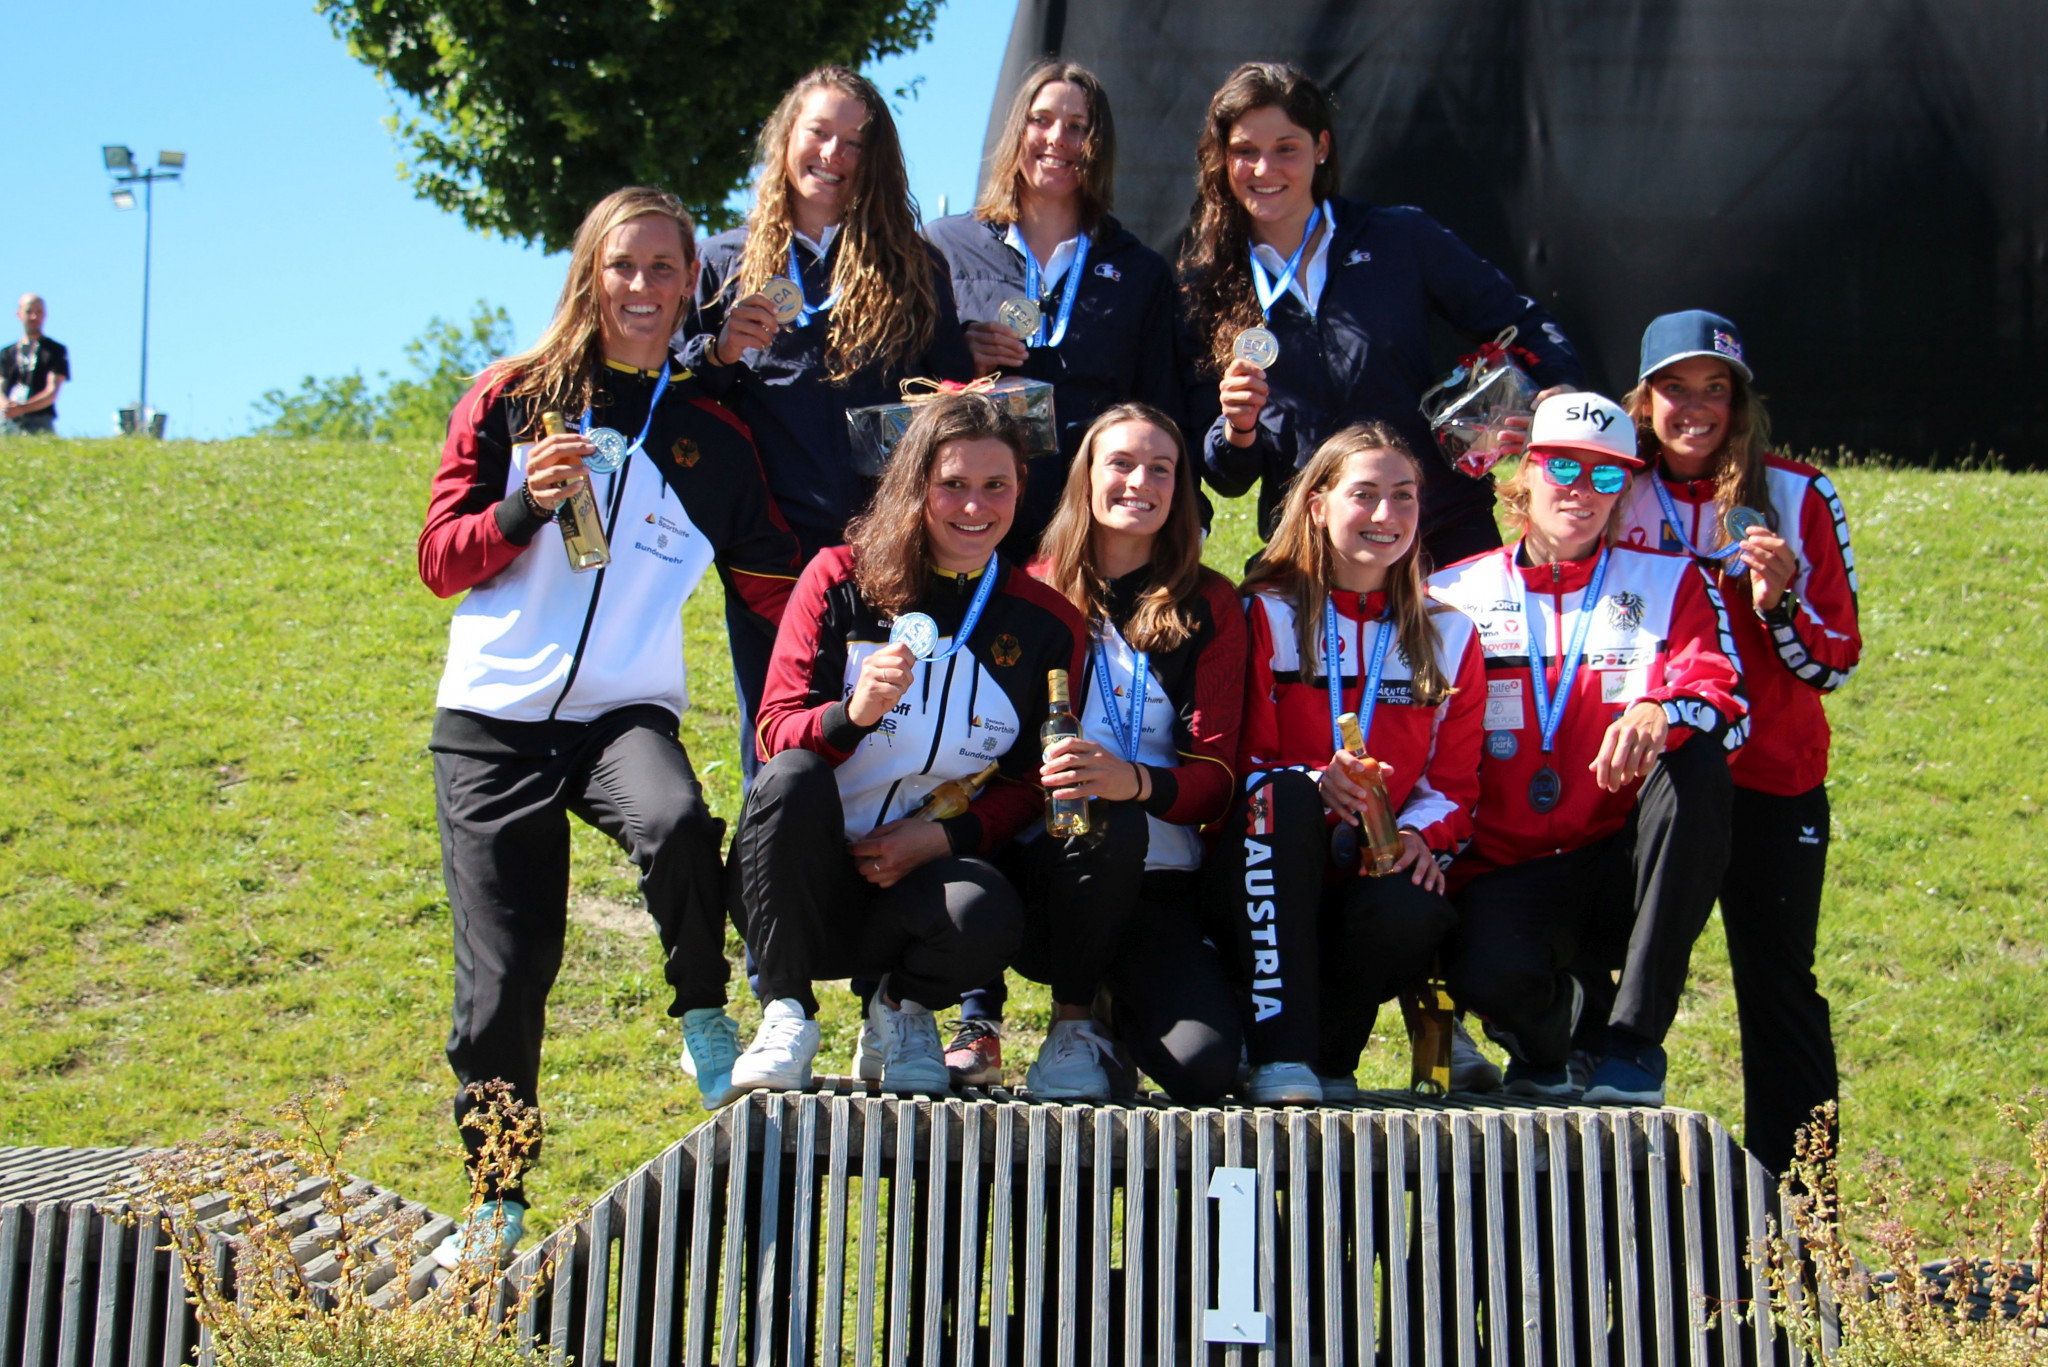 French trio Marie-Zelia Lafont, Lucie Baudu and Camille Prigent topped the podium at the European Canoe Association European Canoe Slalom Championships in Pau, France ©ECA